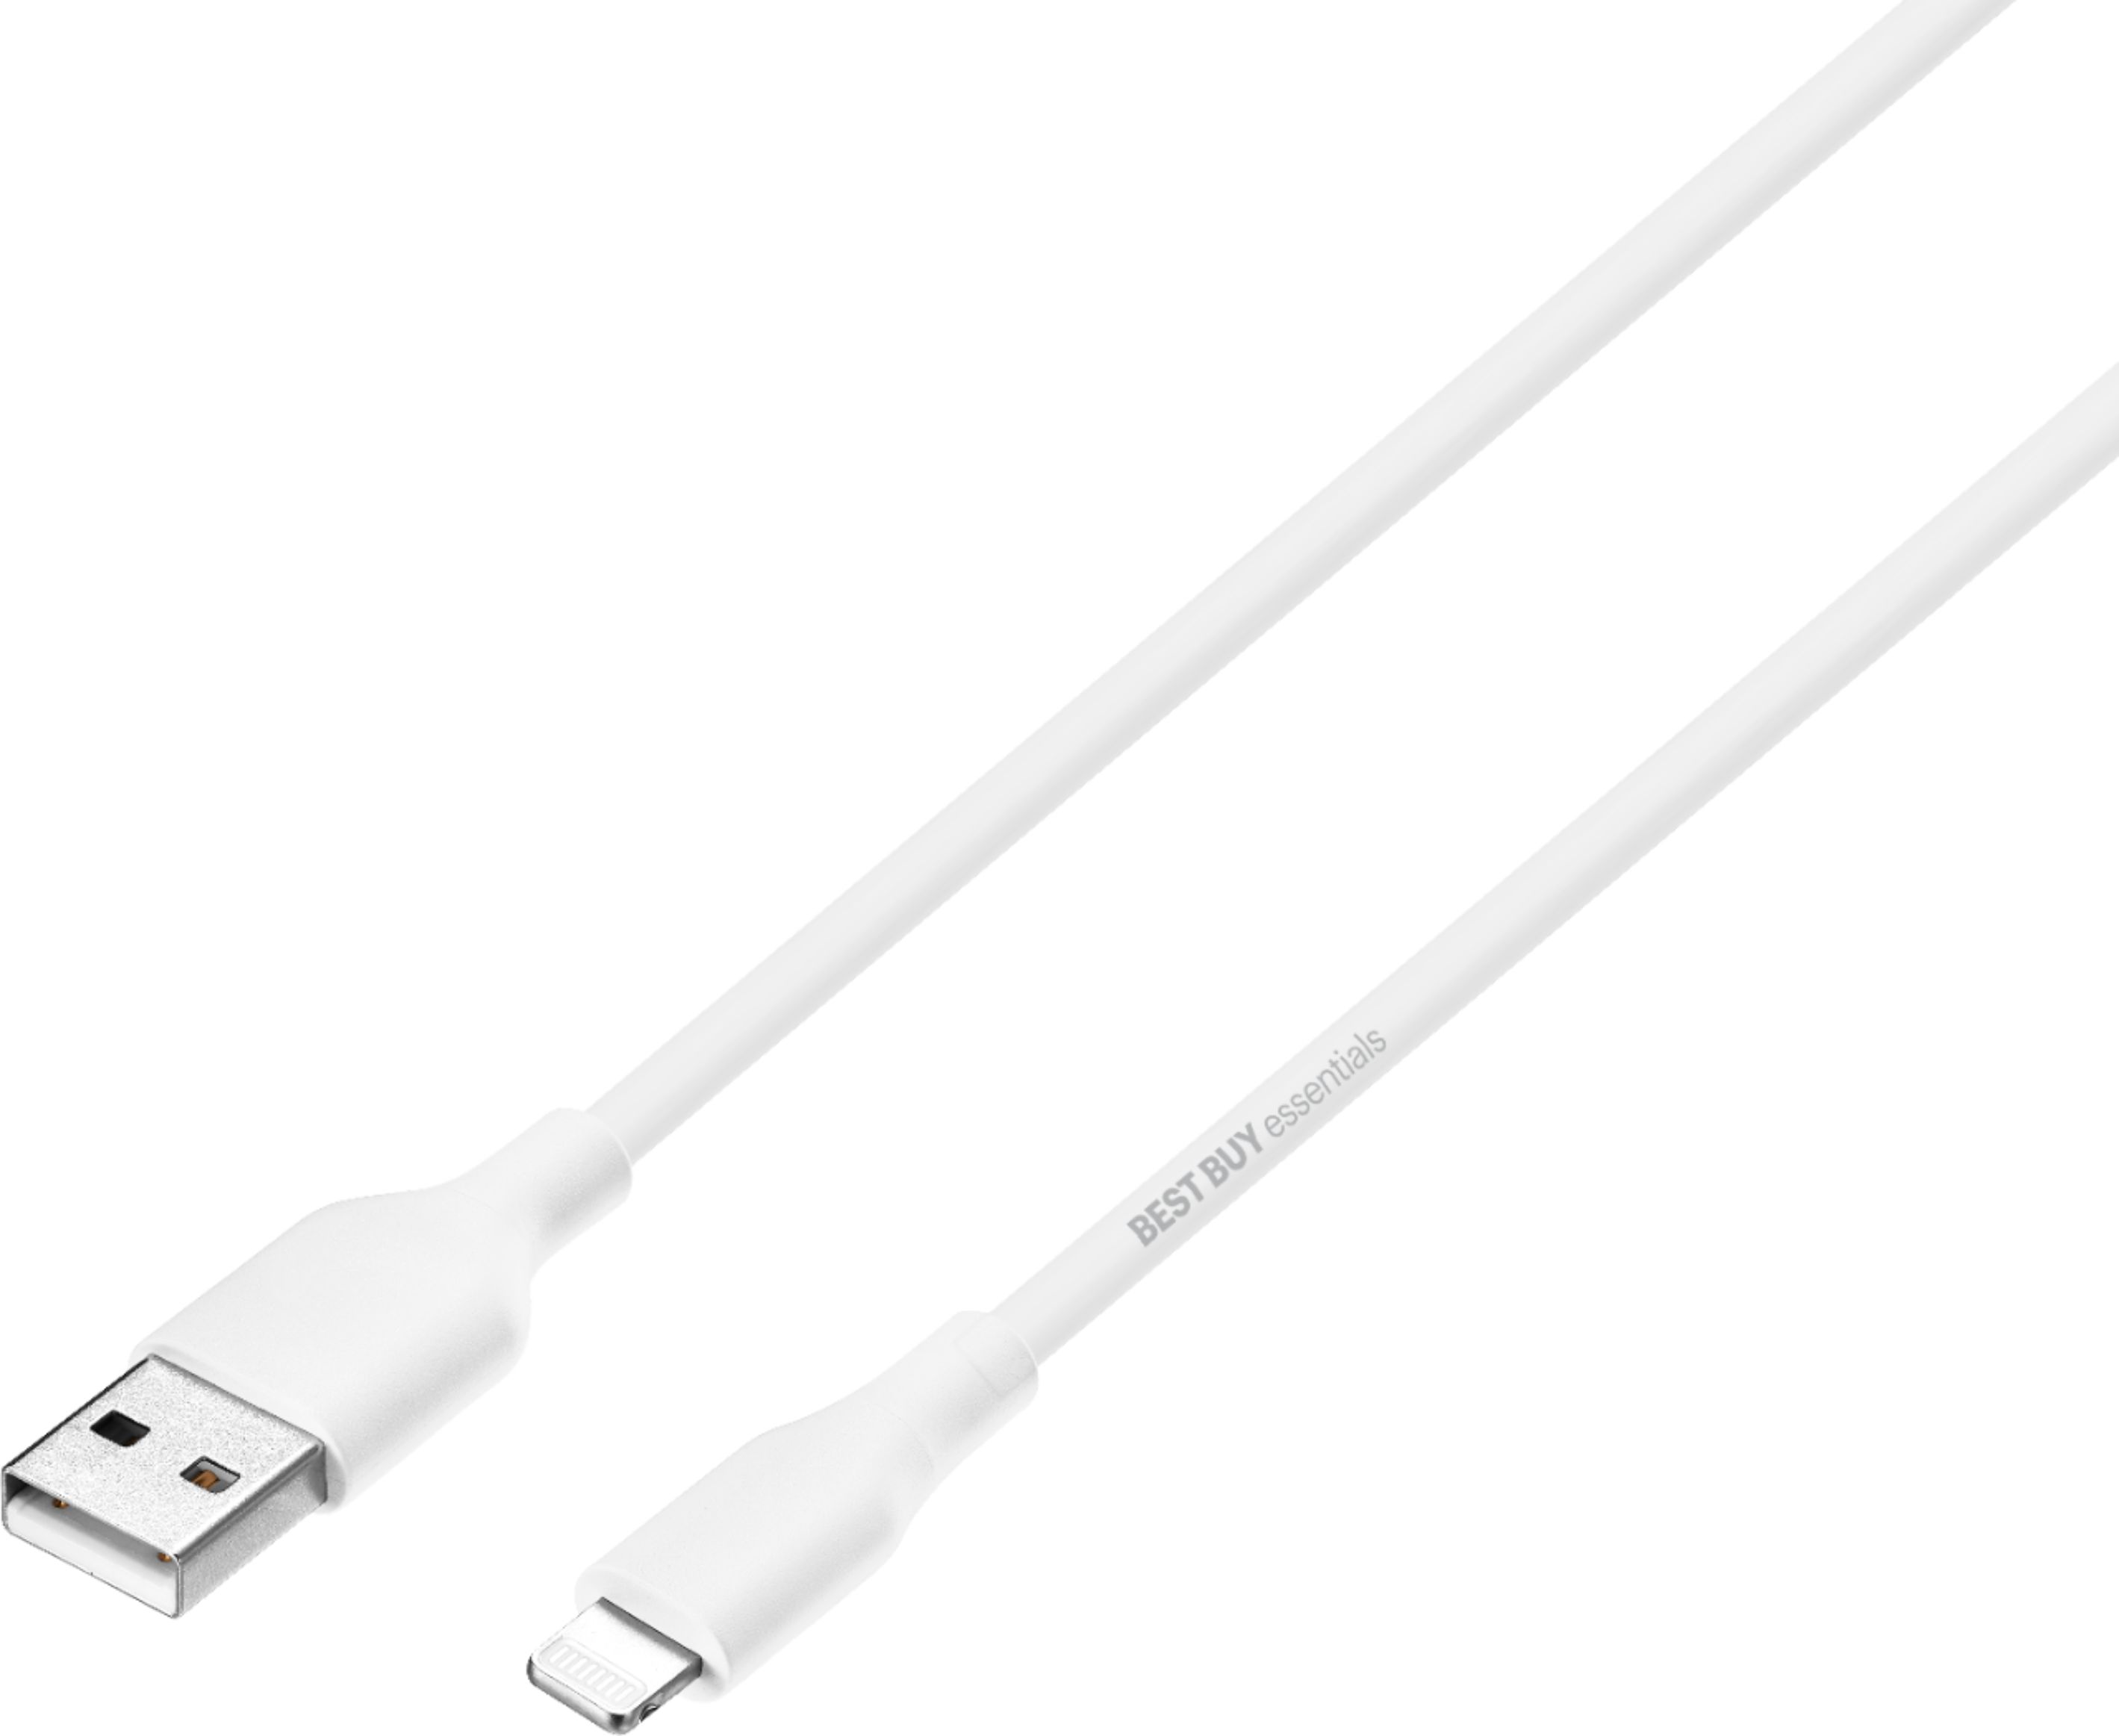 Best Buy essentials™ - 5' Lightning to USB Charge-and-Sync Cable (3 Pack) - White